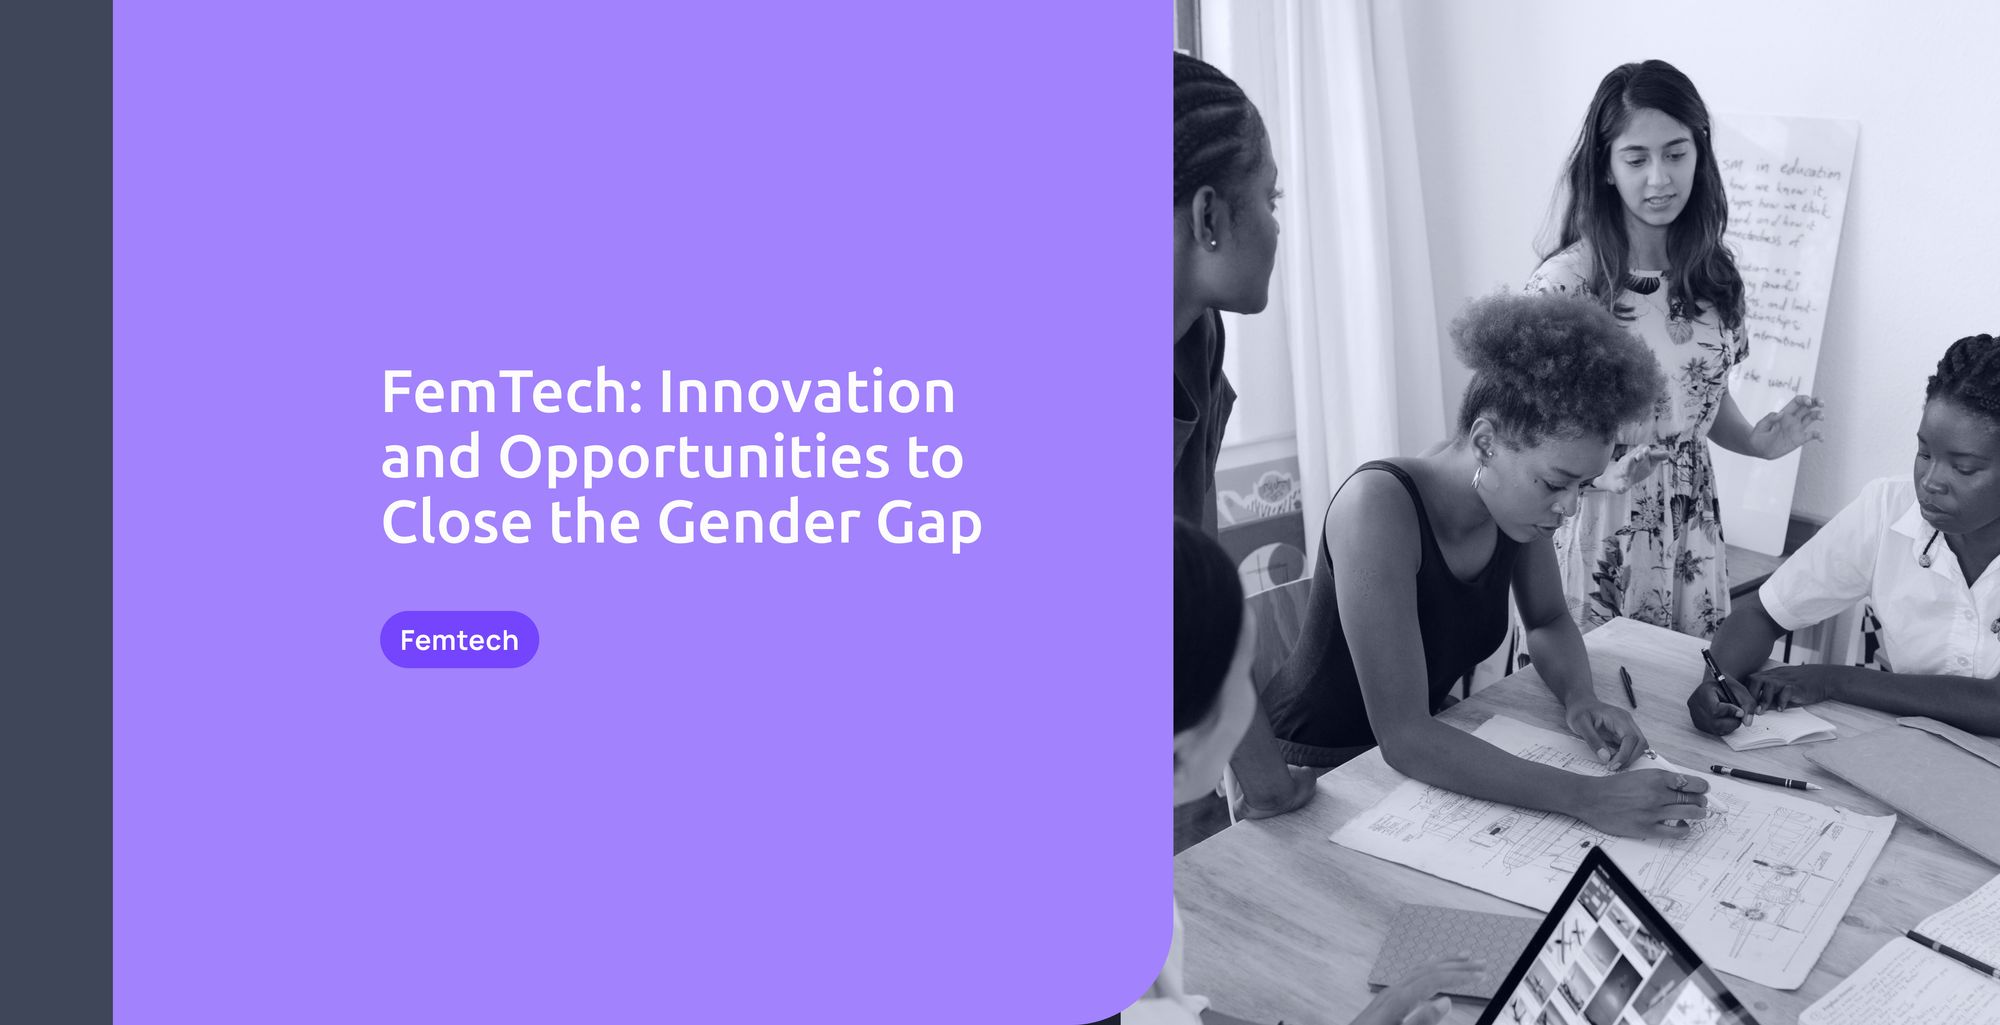 FemTech: Innovation and Opportunities to Close the Gender Gap